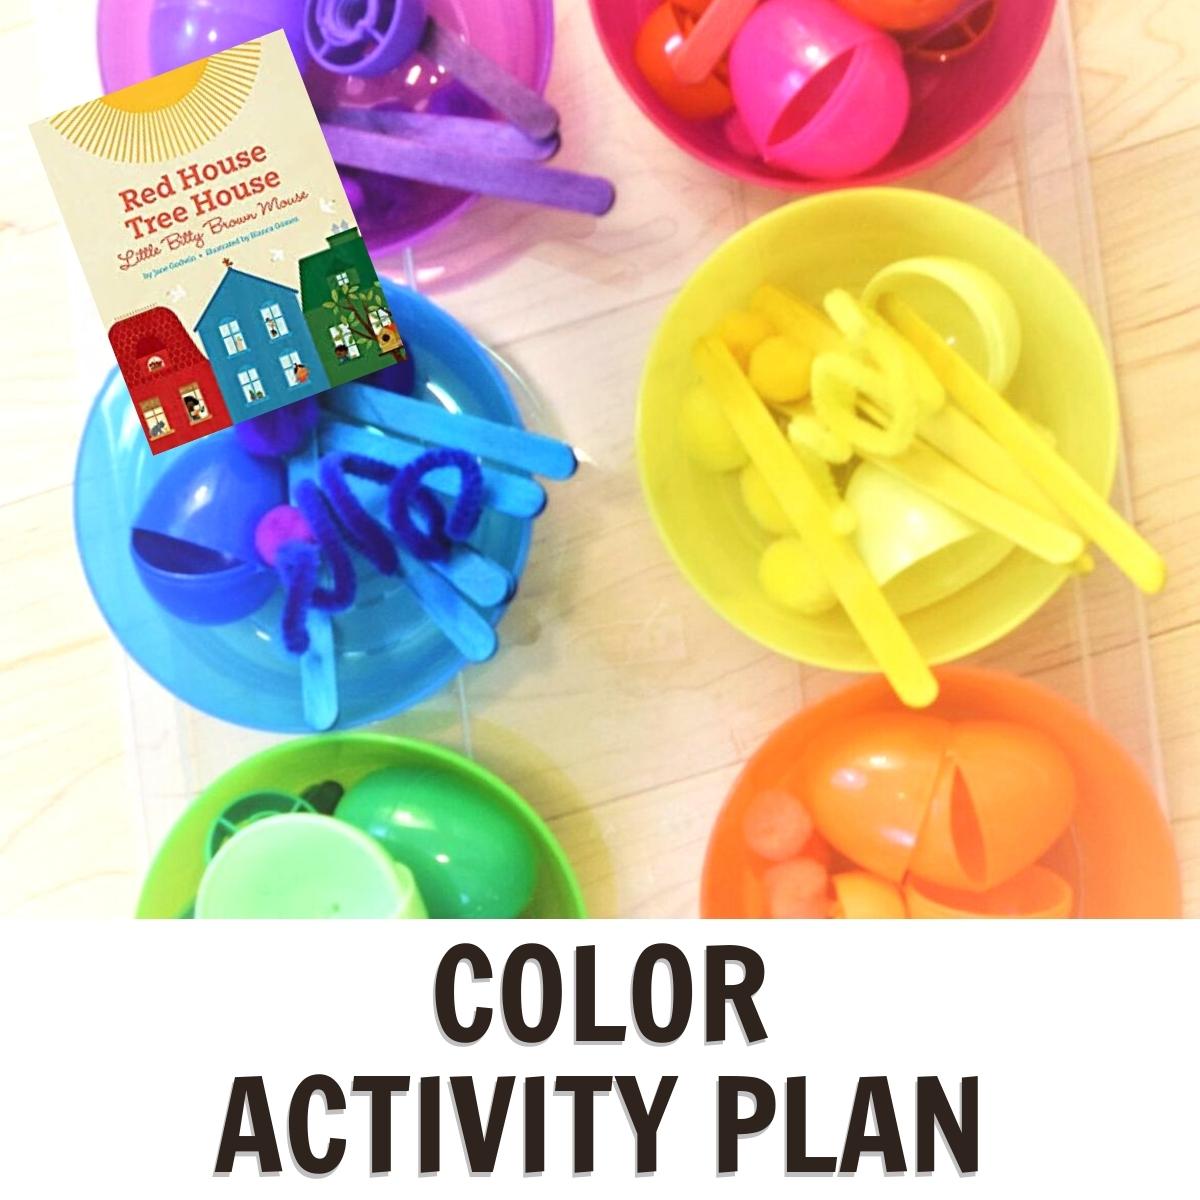 color activity plan for preschool featuring Red House Tree House Little Bitty Brown Mouse